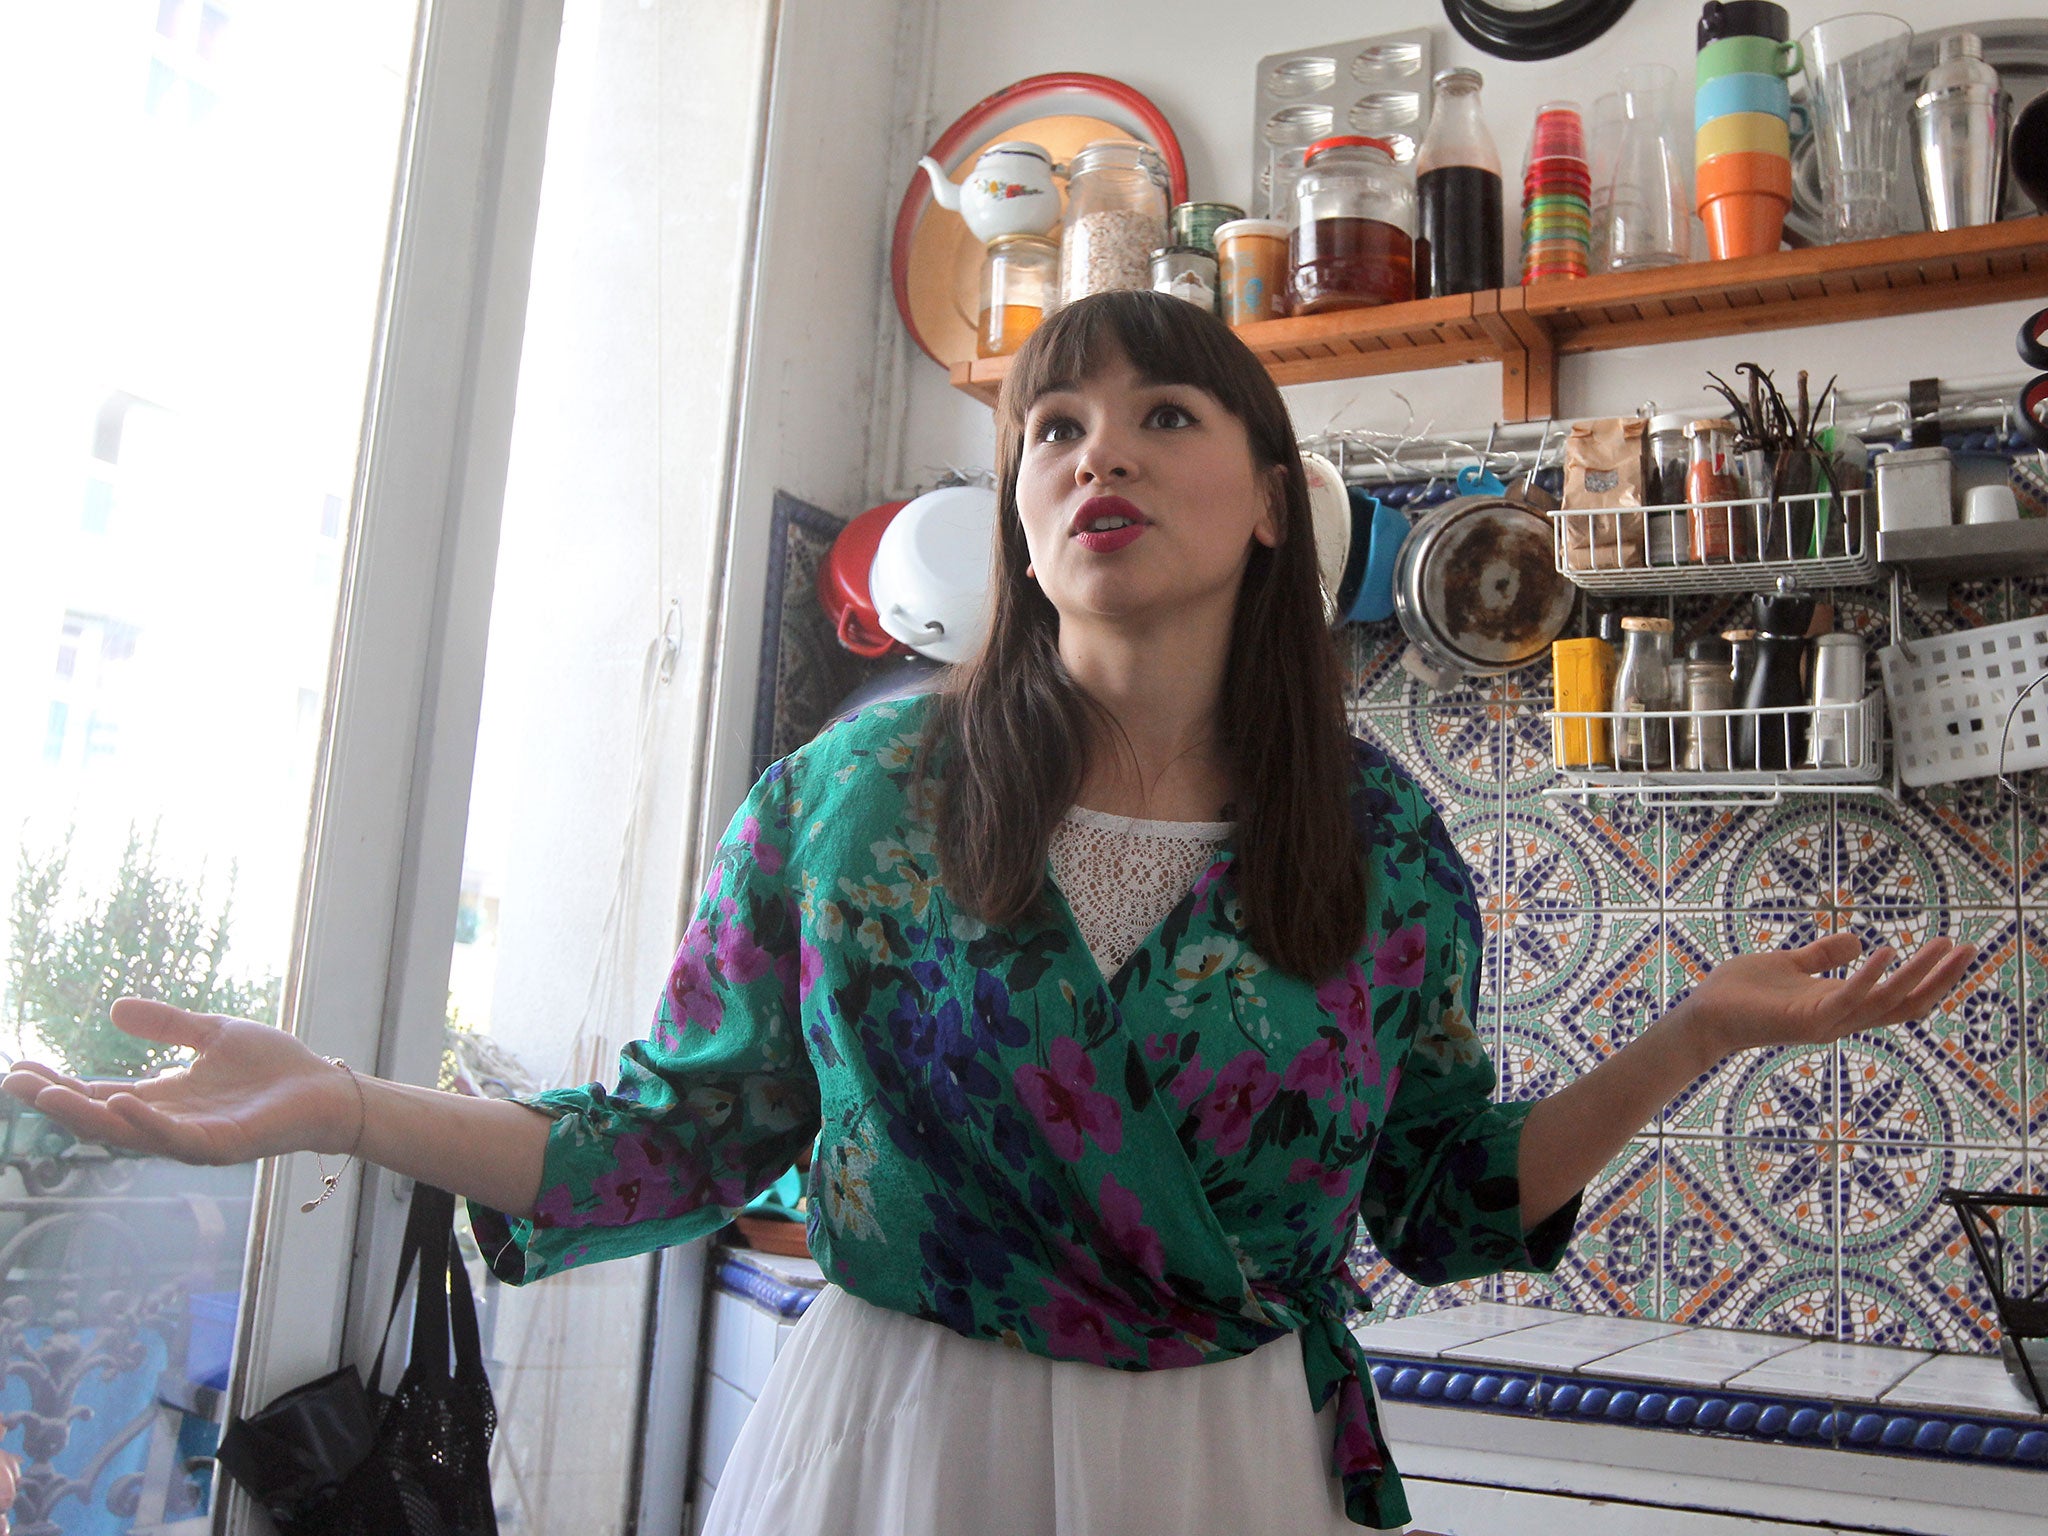 Little Paris Kitchen star Rachel Khoo asks where all the female TV chefs are and hits out at broadcasters for neglecting them